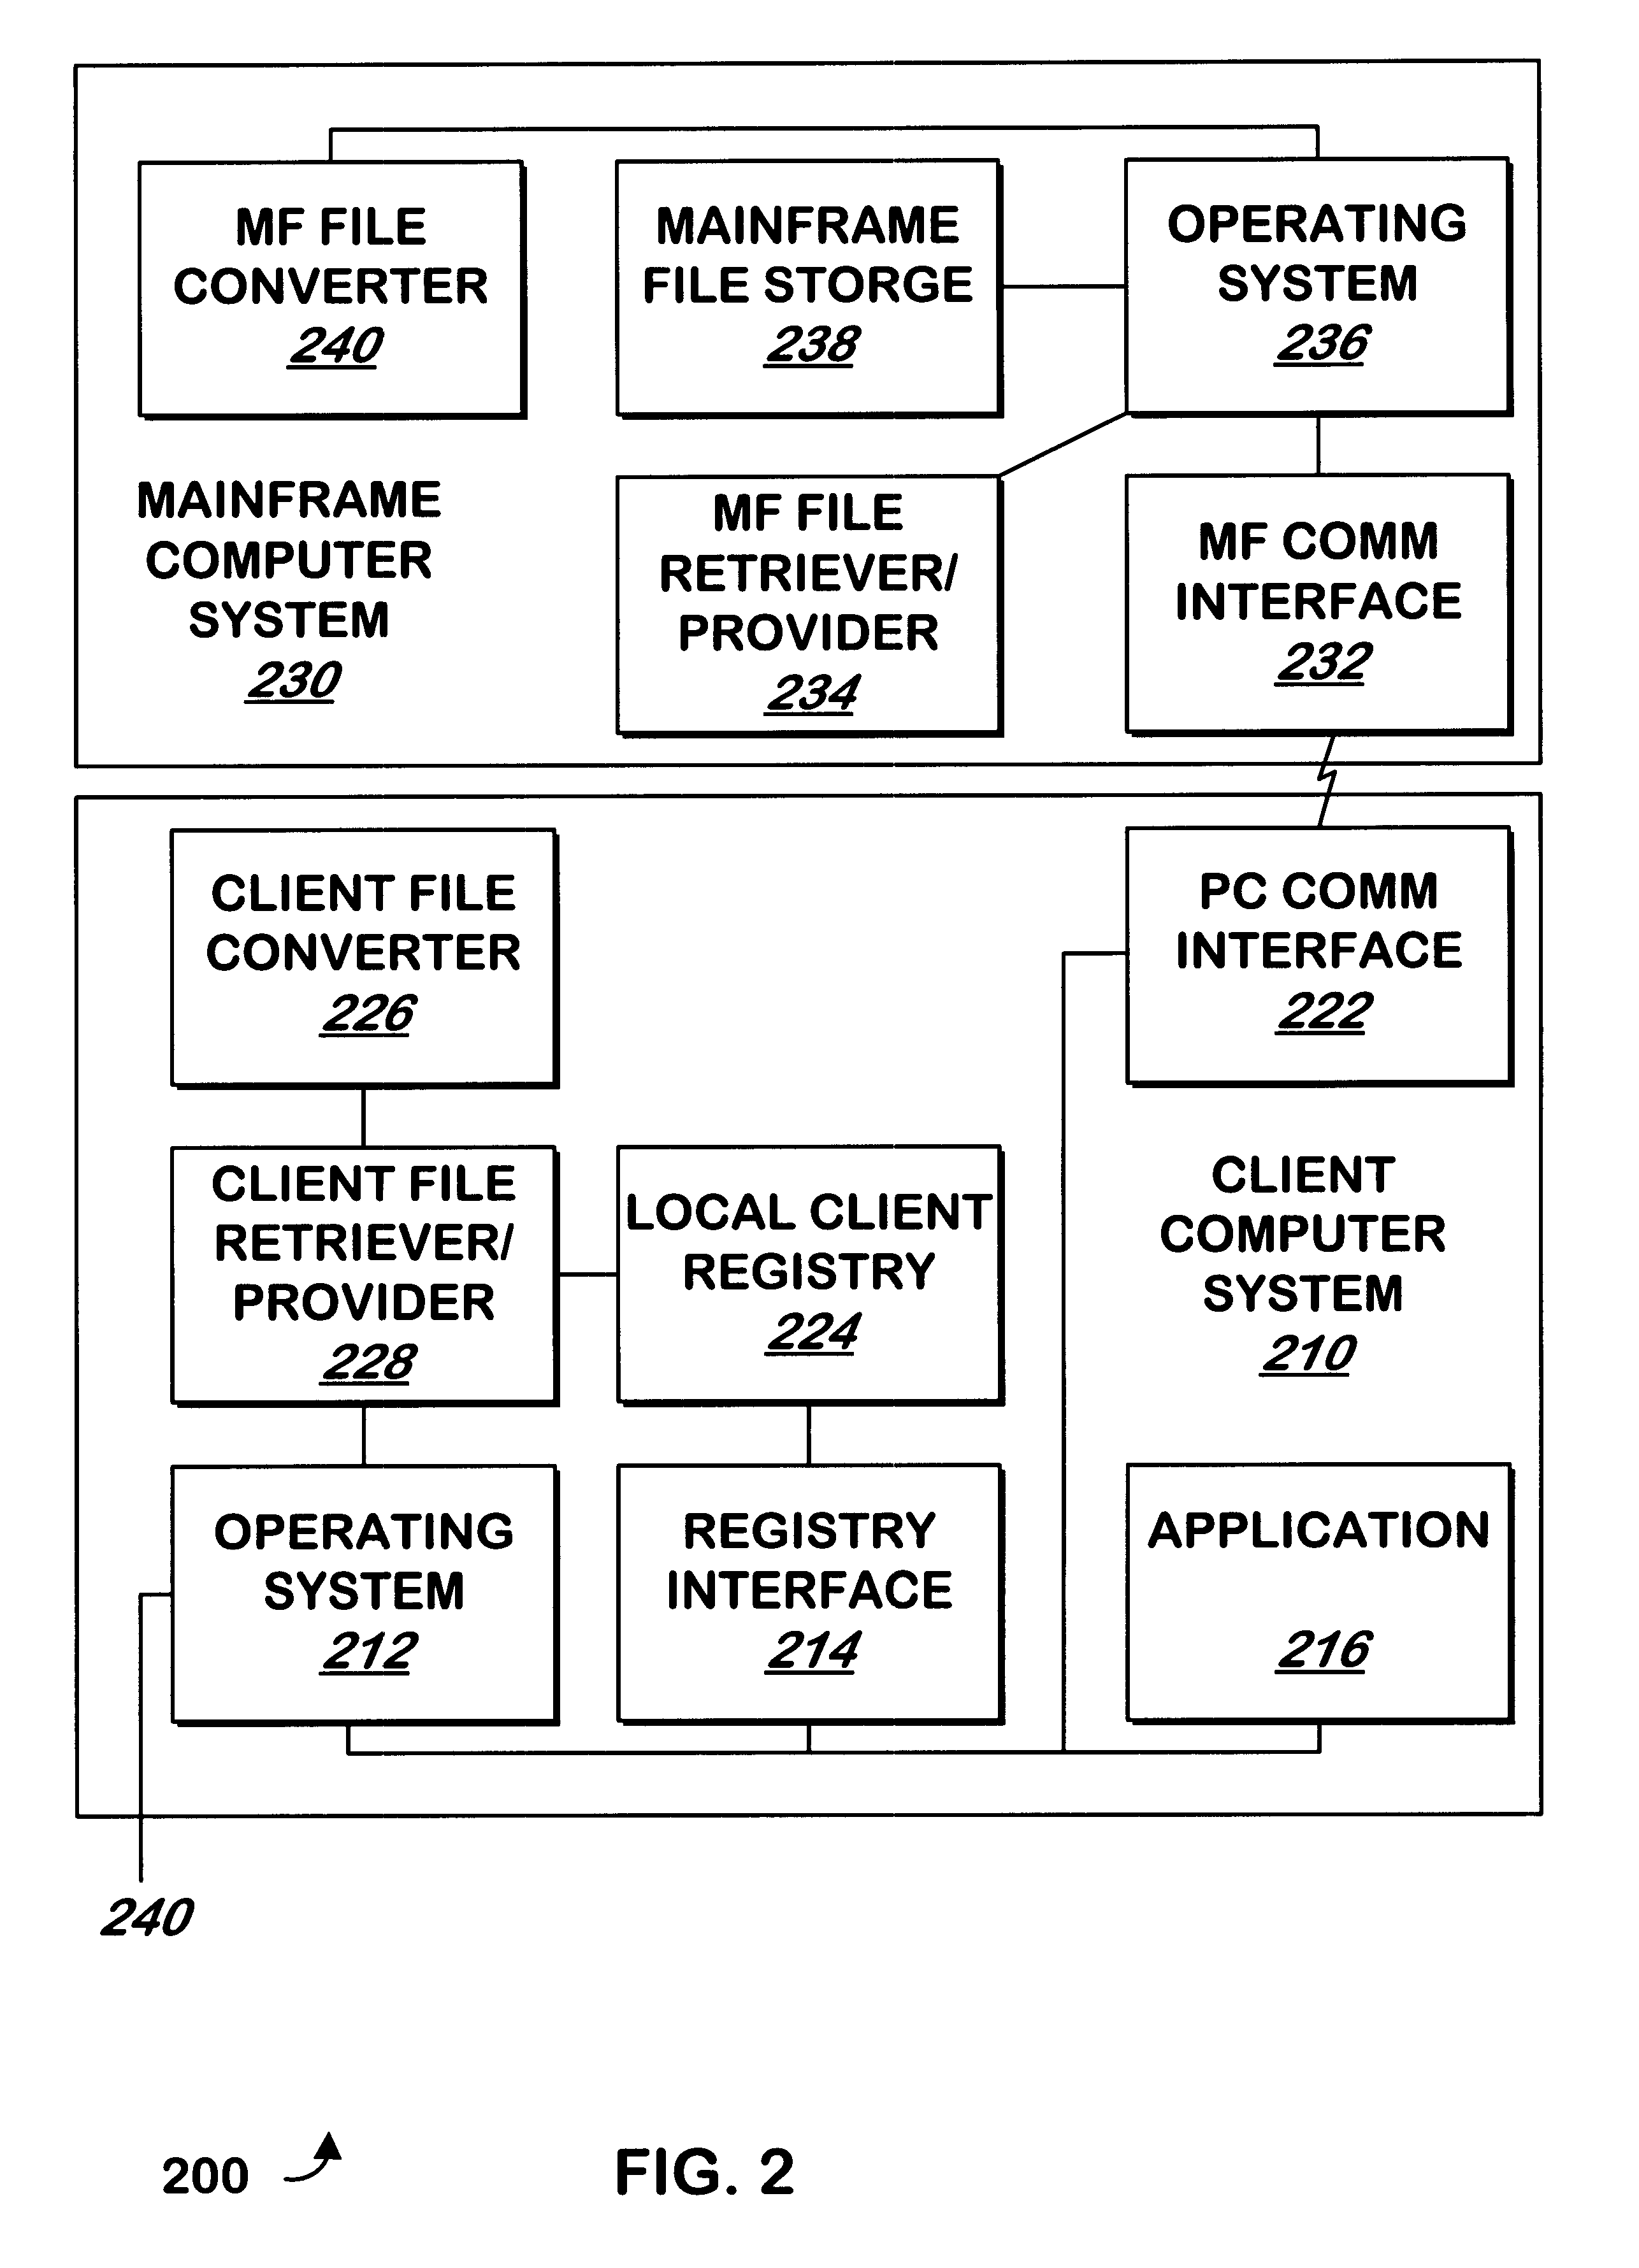 Method and apparatus for converting files stored on a mainframe computer for use by a client computer